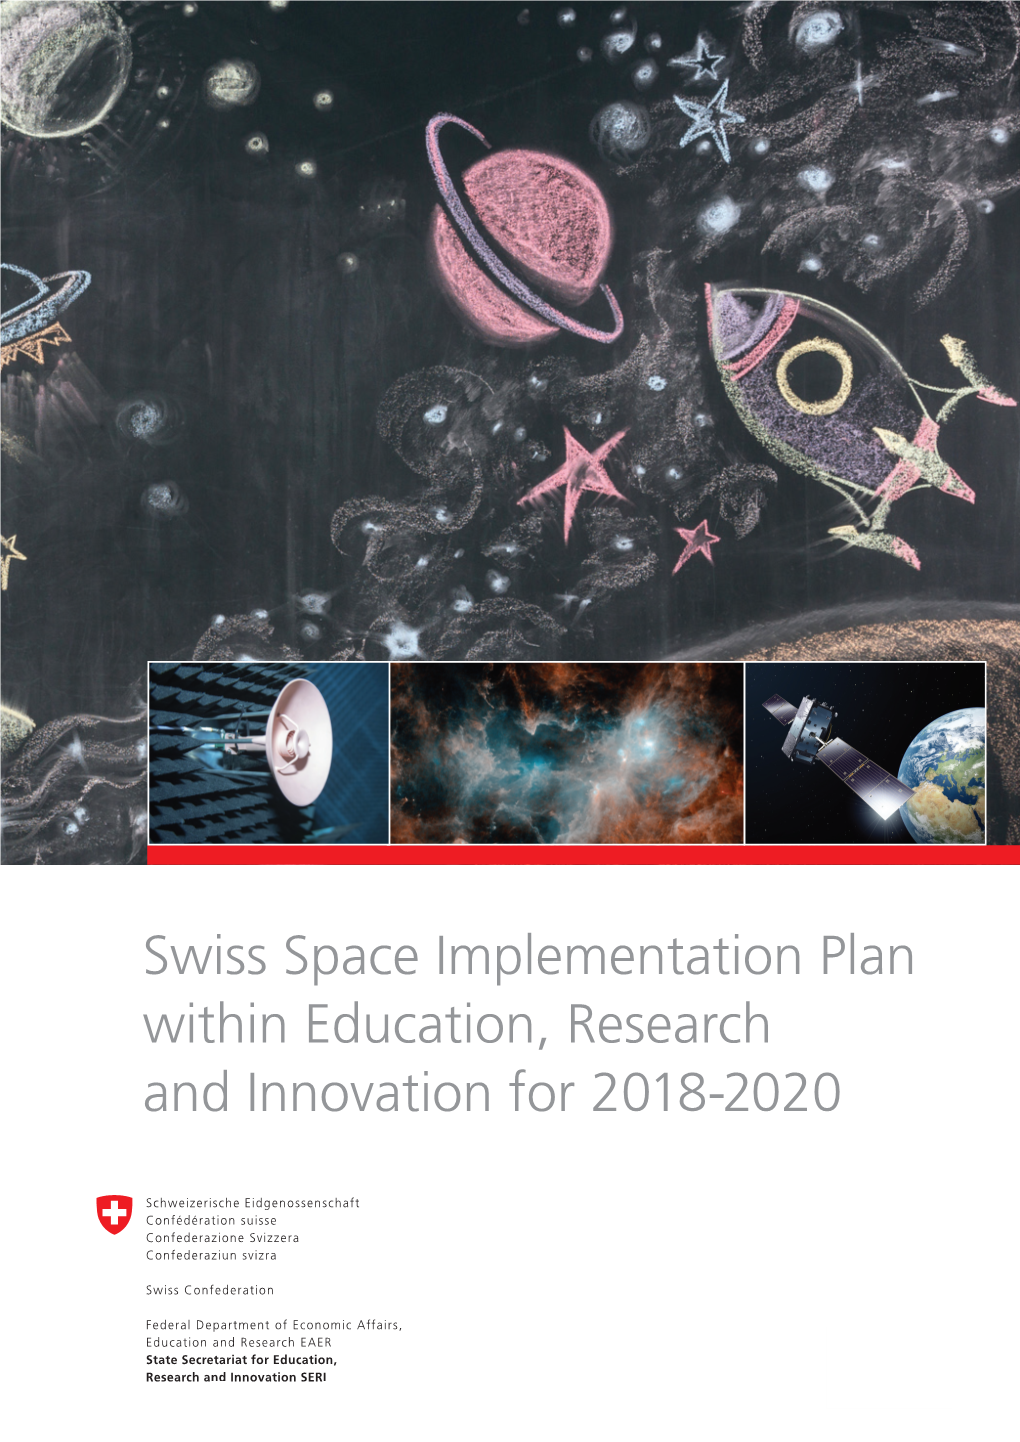 Swiss Space Implementation Plan Within Education, Research and Innovation for 2018-2020